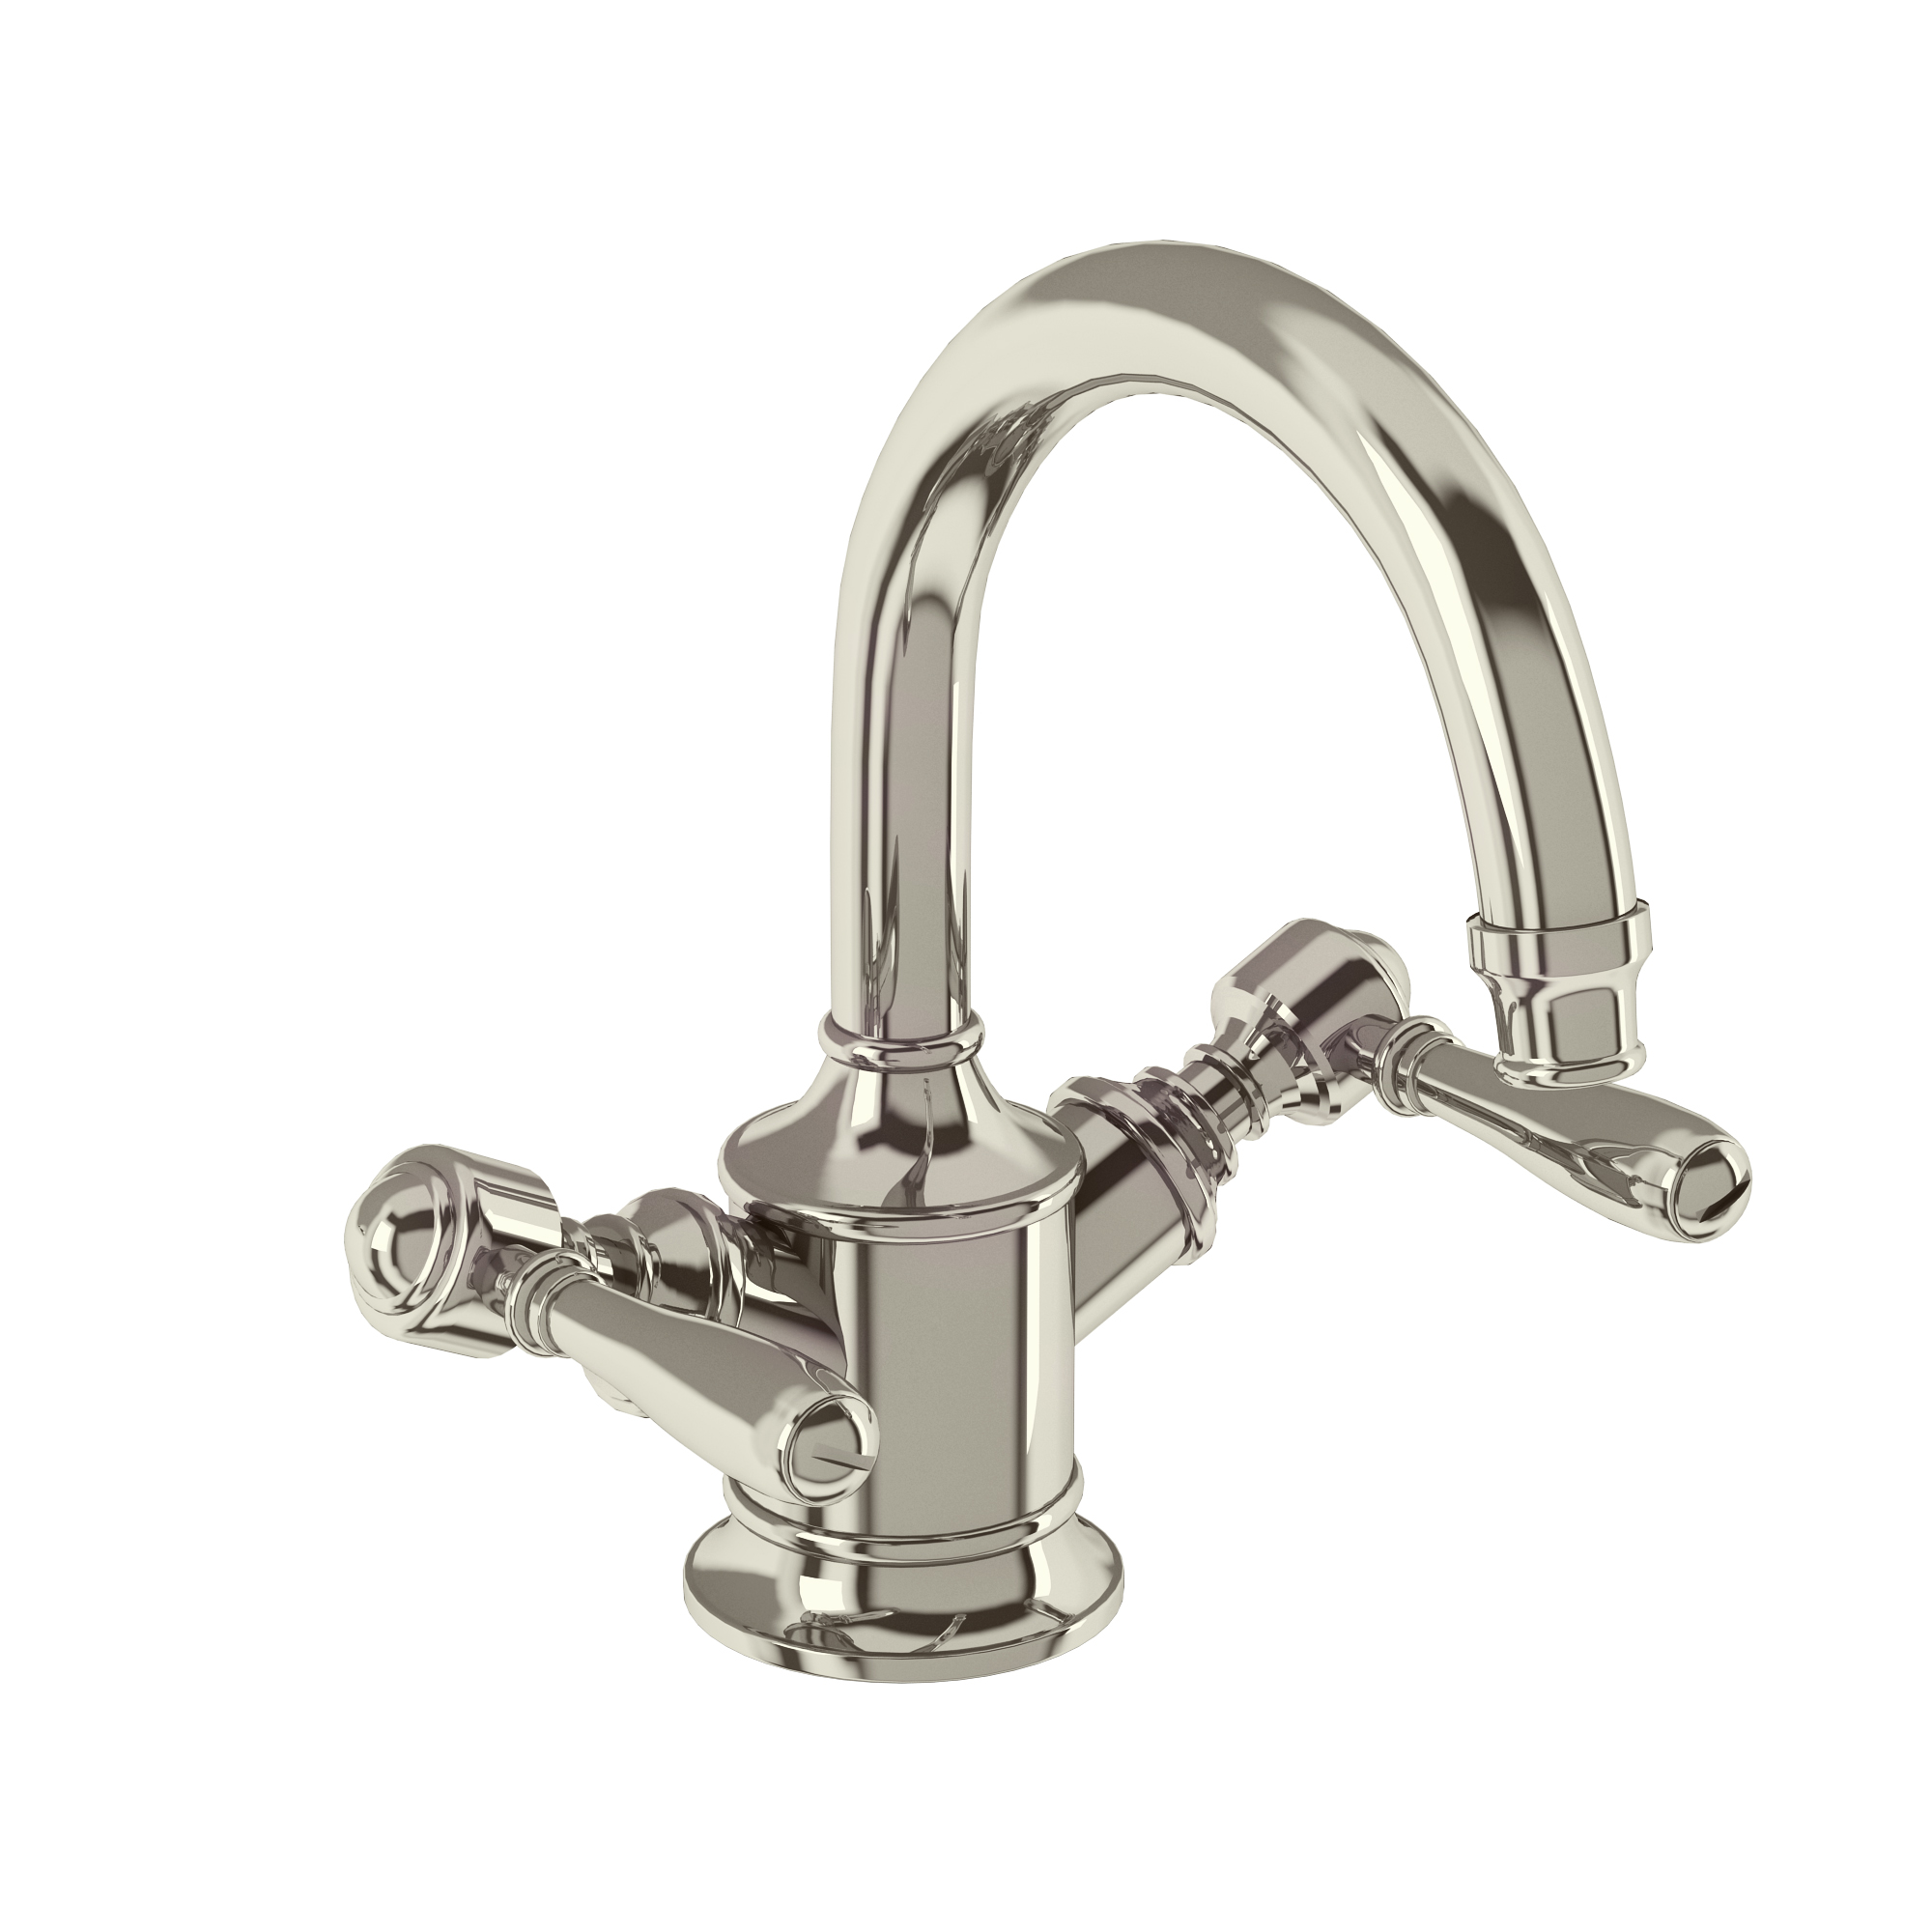 Arcade Dual-lever basin mixer without pop up waste - nickel - with brass lever